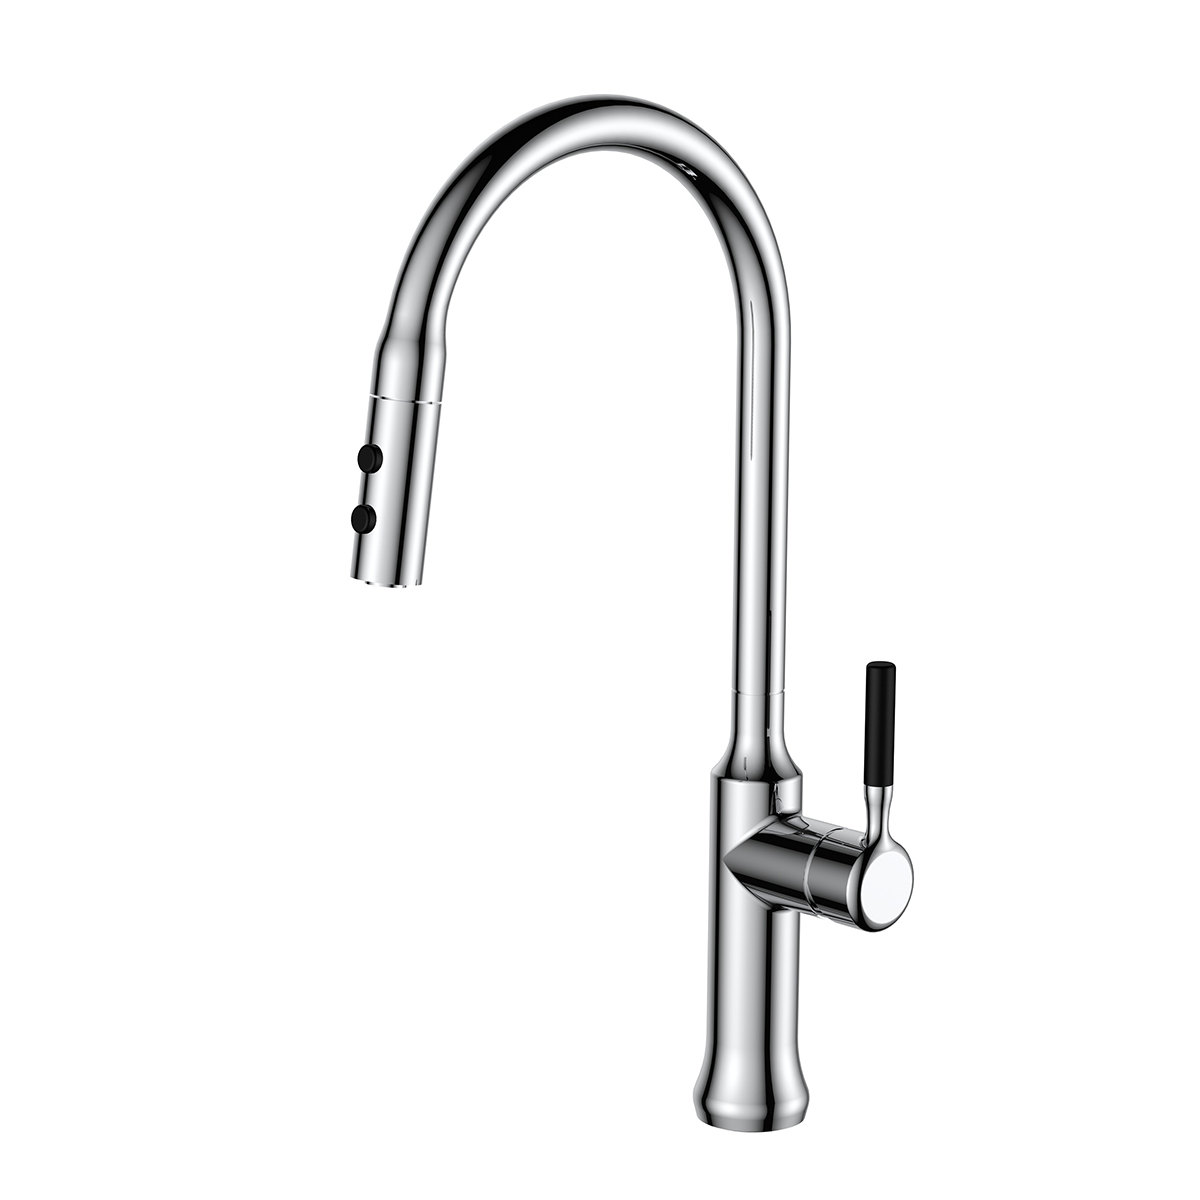 Aquacubic cUPC Luxury Modern sanitary ware long neck flexible hose pull Down spray kitchen sink faucet AF3048-5